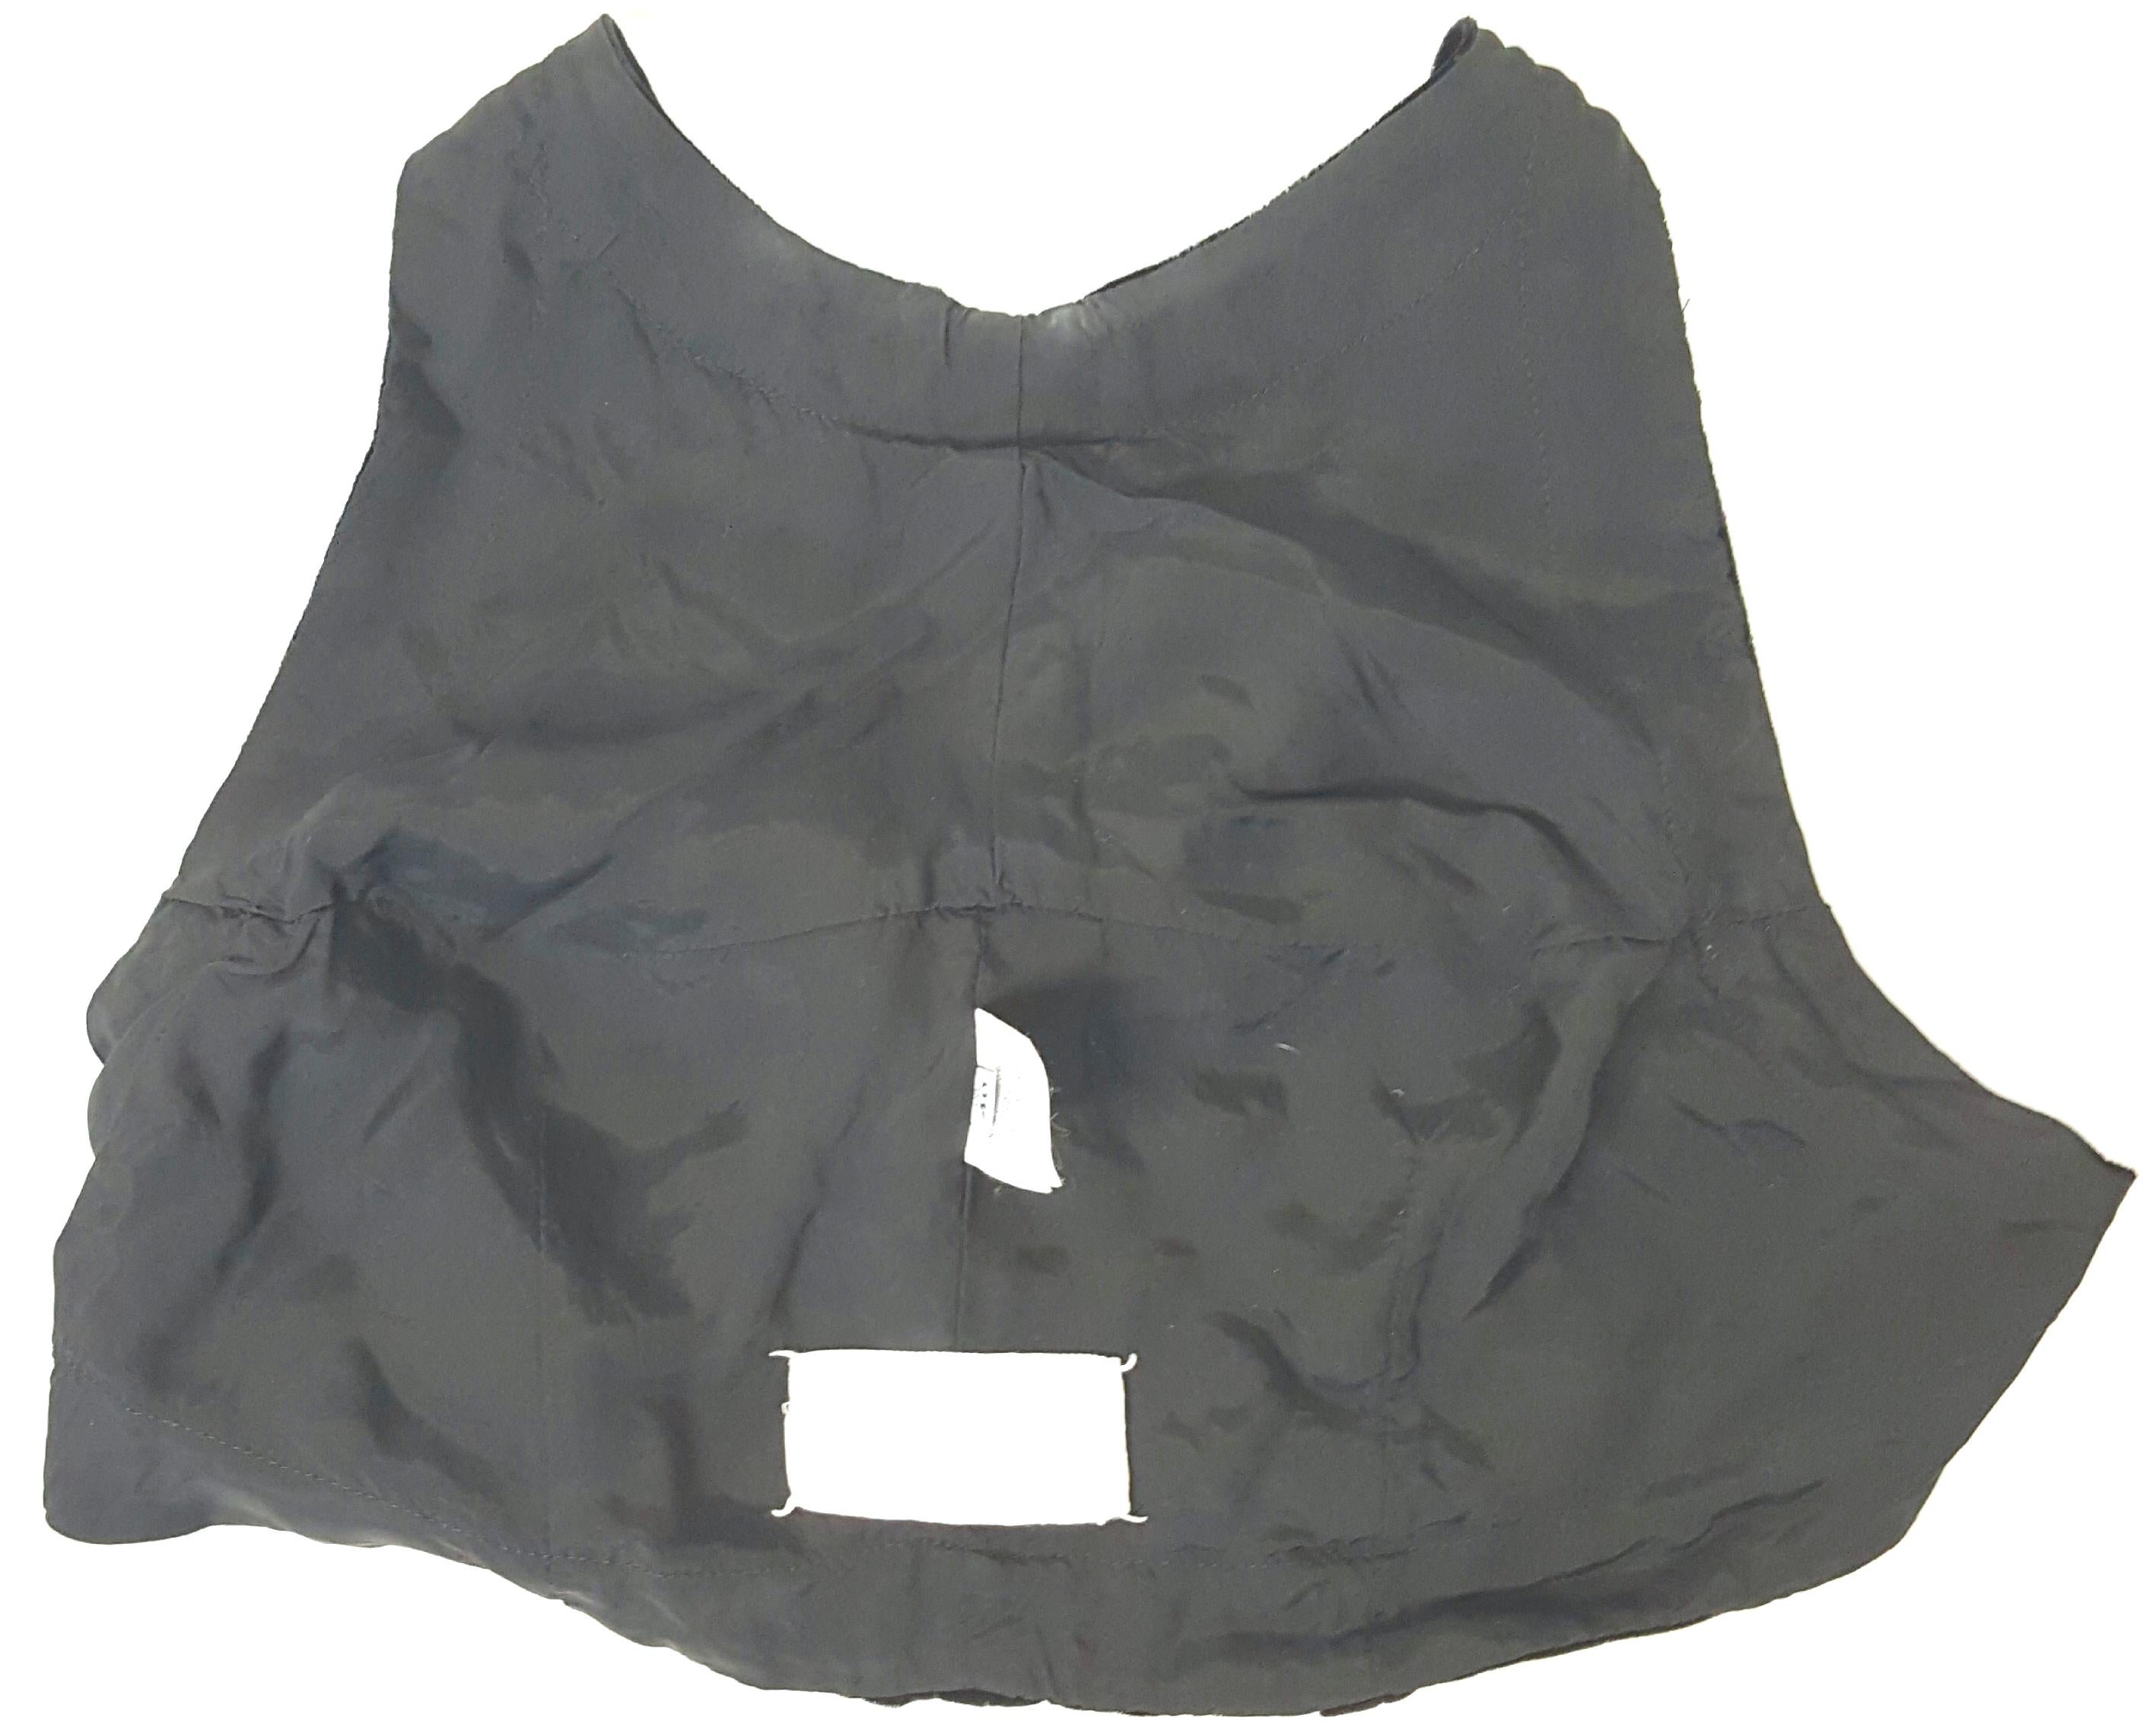 MartinMargiela Early1990s UniqueUpcycled Garters&Crotch Velvet CroppedHalter Bra For Sale 2